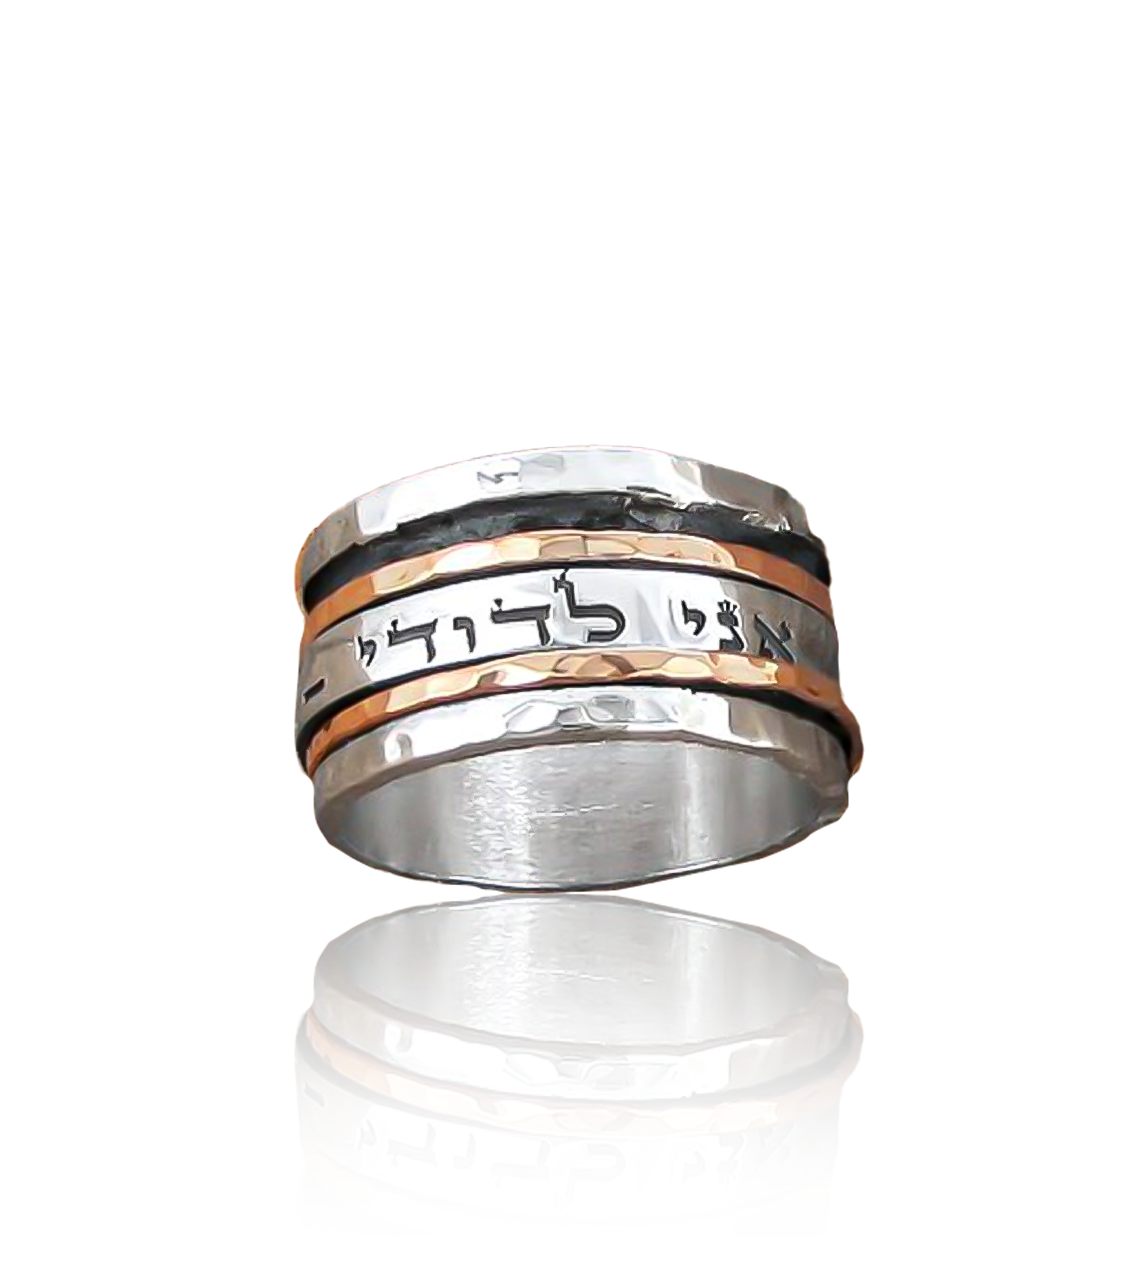 _0011_I-Am-My-Beloved-Rings,-Jewish-Spinner-Rings,-Hebrew-Silver-Ring,-Wedding-Band,-Israel-Silver-Rings,-Sterling-Silve